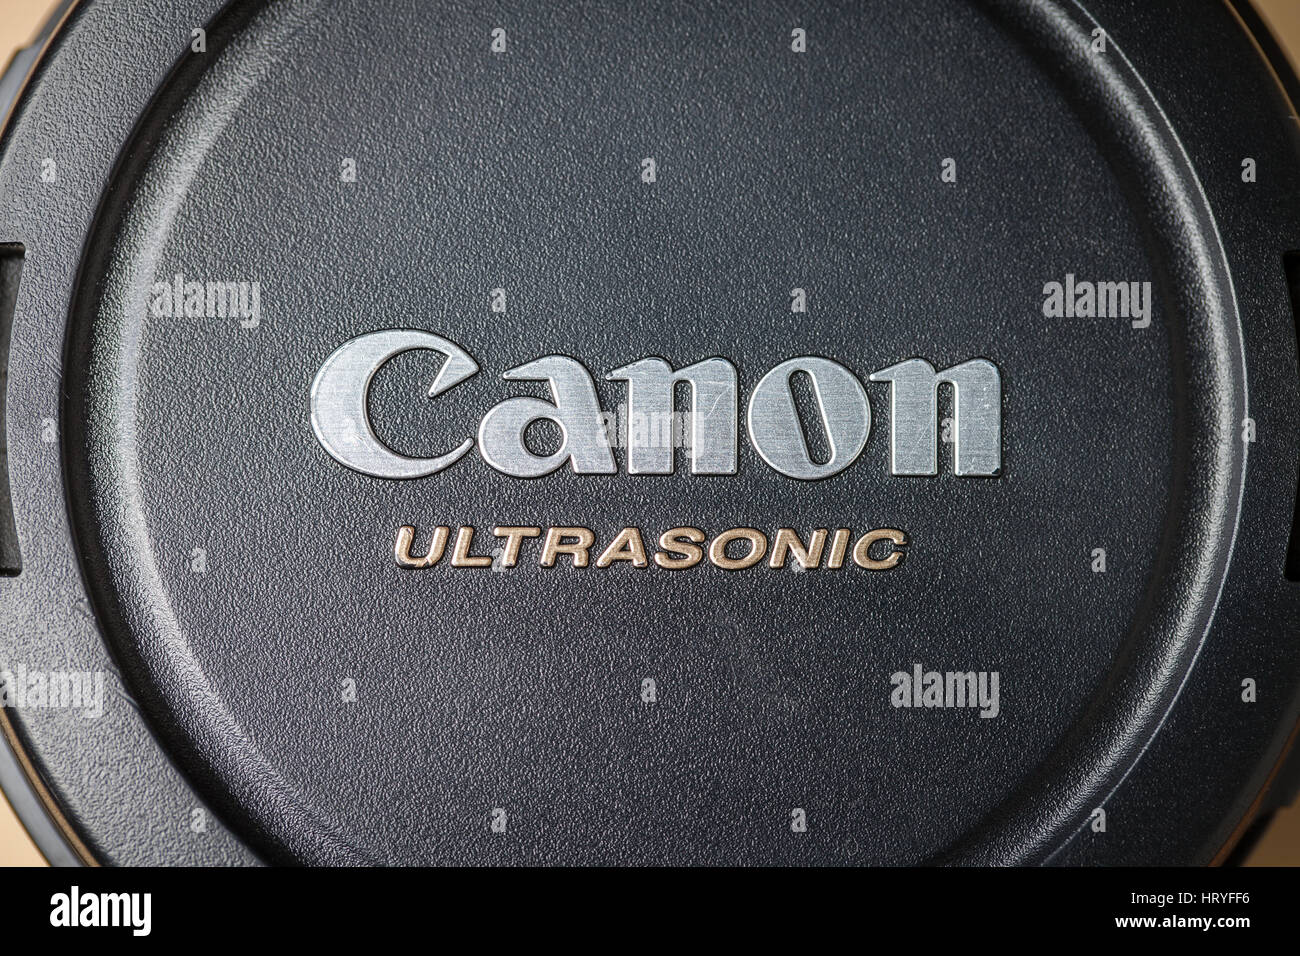 LANDESBERGEN / GERMANY - MARCH 5, 2017: Canon logo on a lens cover Stock Photo